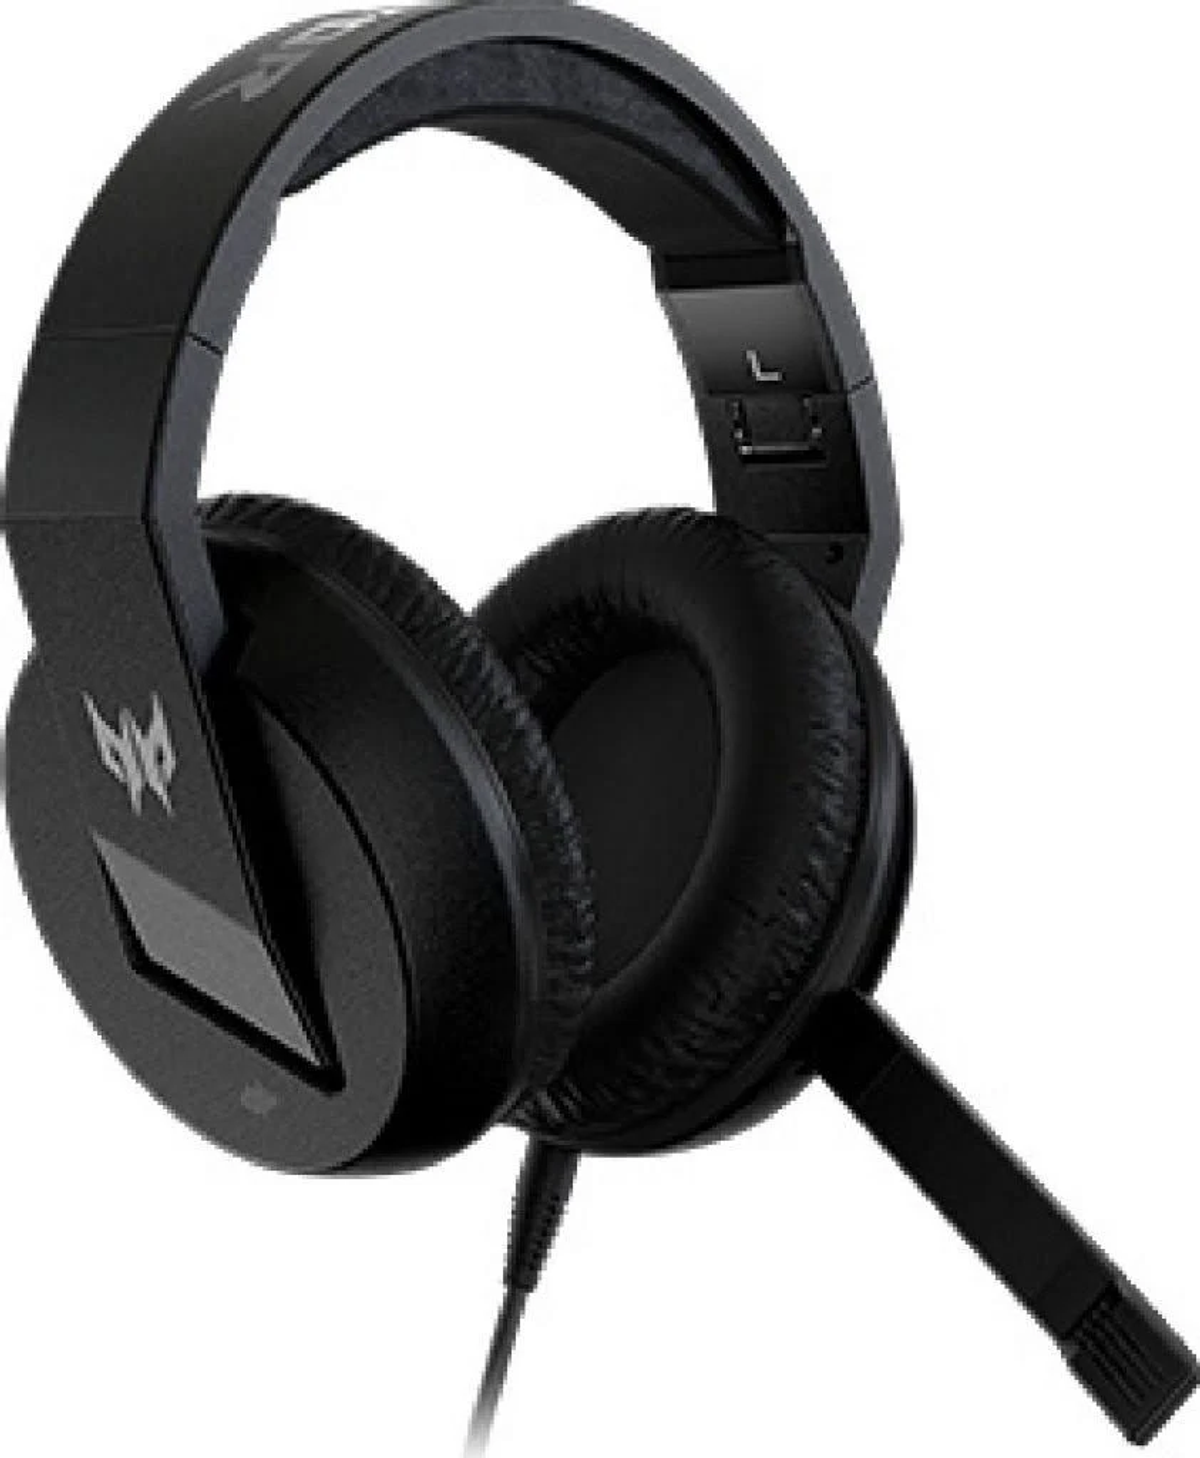 BLOODY G300, Over-ear Bloody Gaming Schwarz Headset